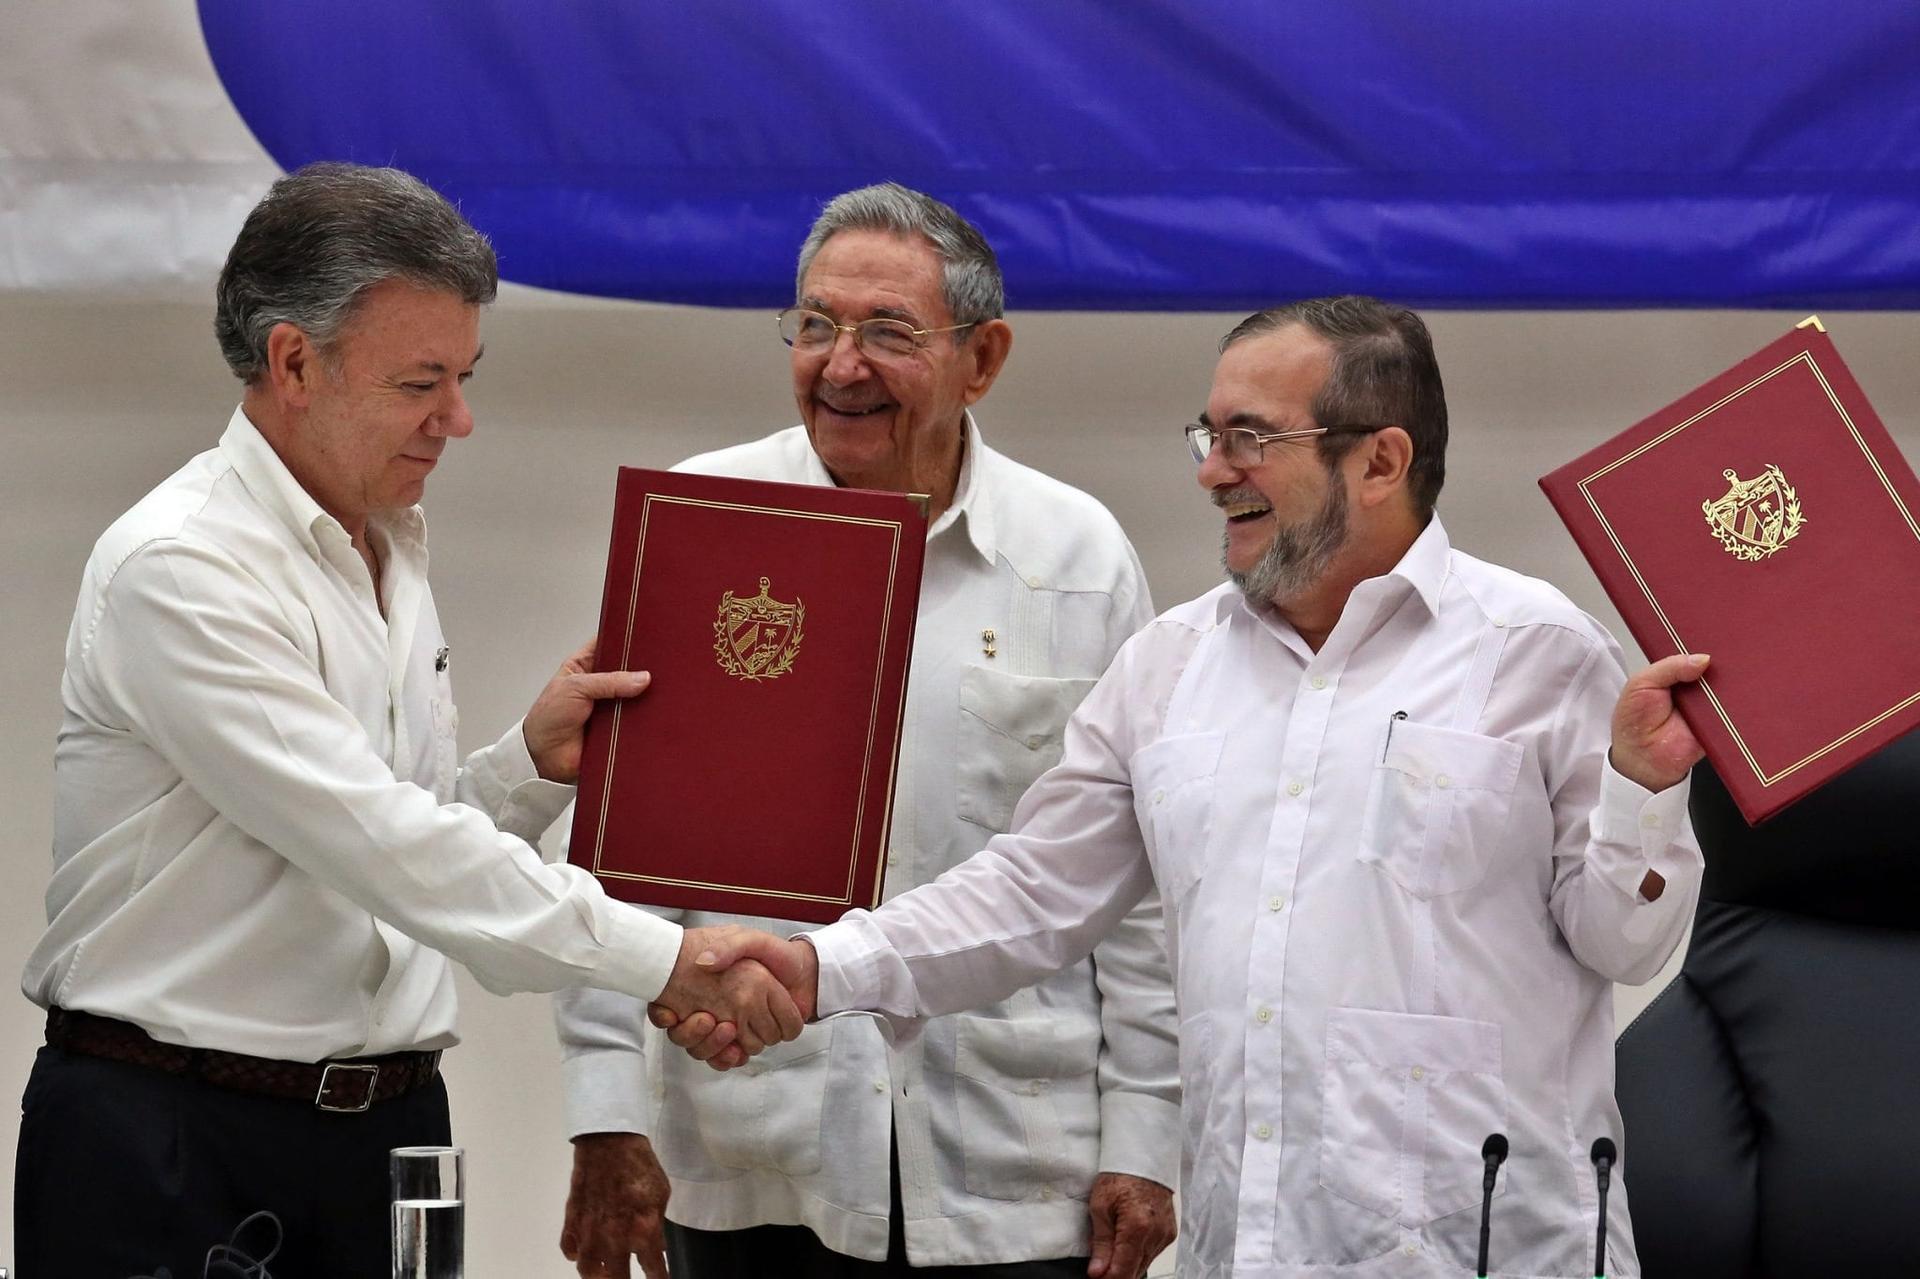 Colombia’s bishops walk a fine line on historic peace deal